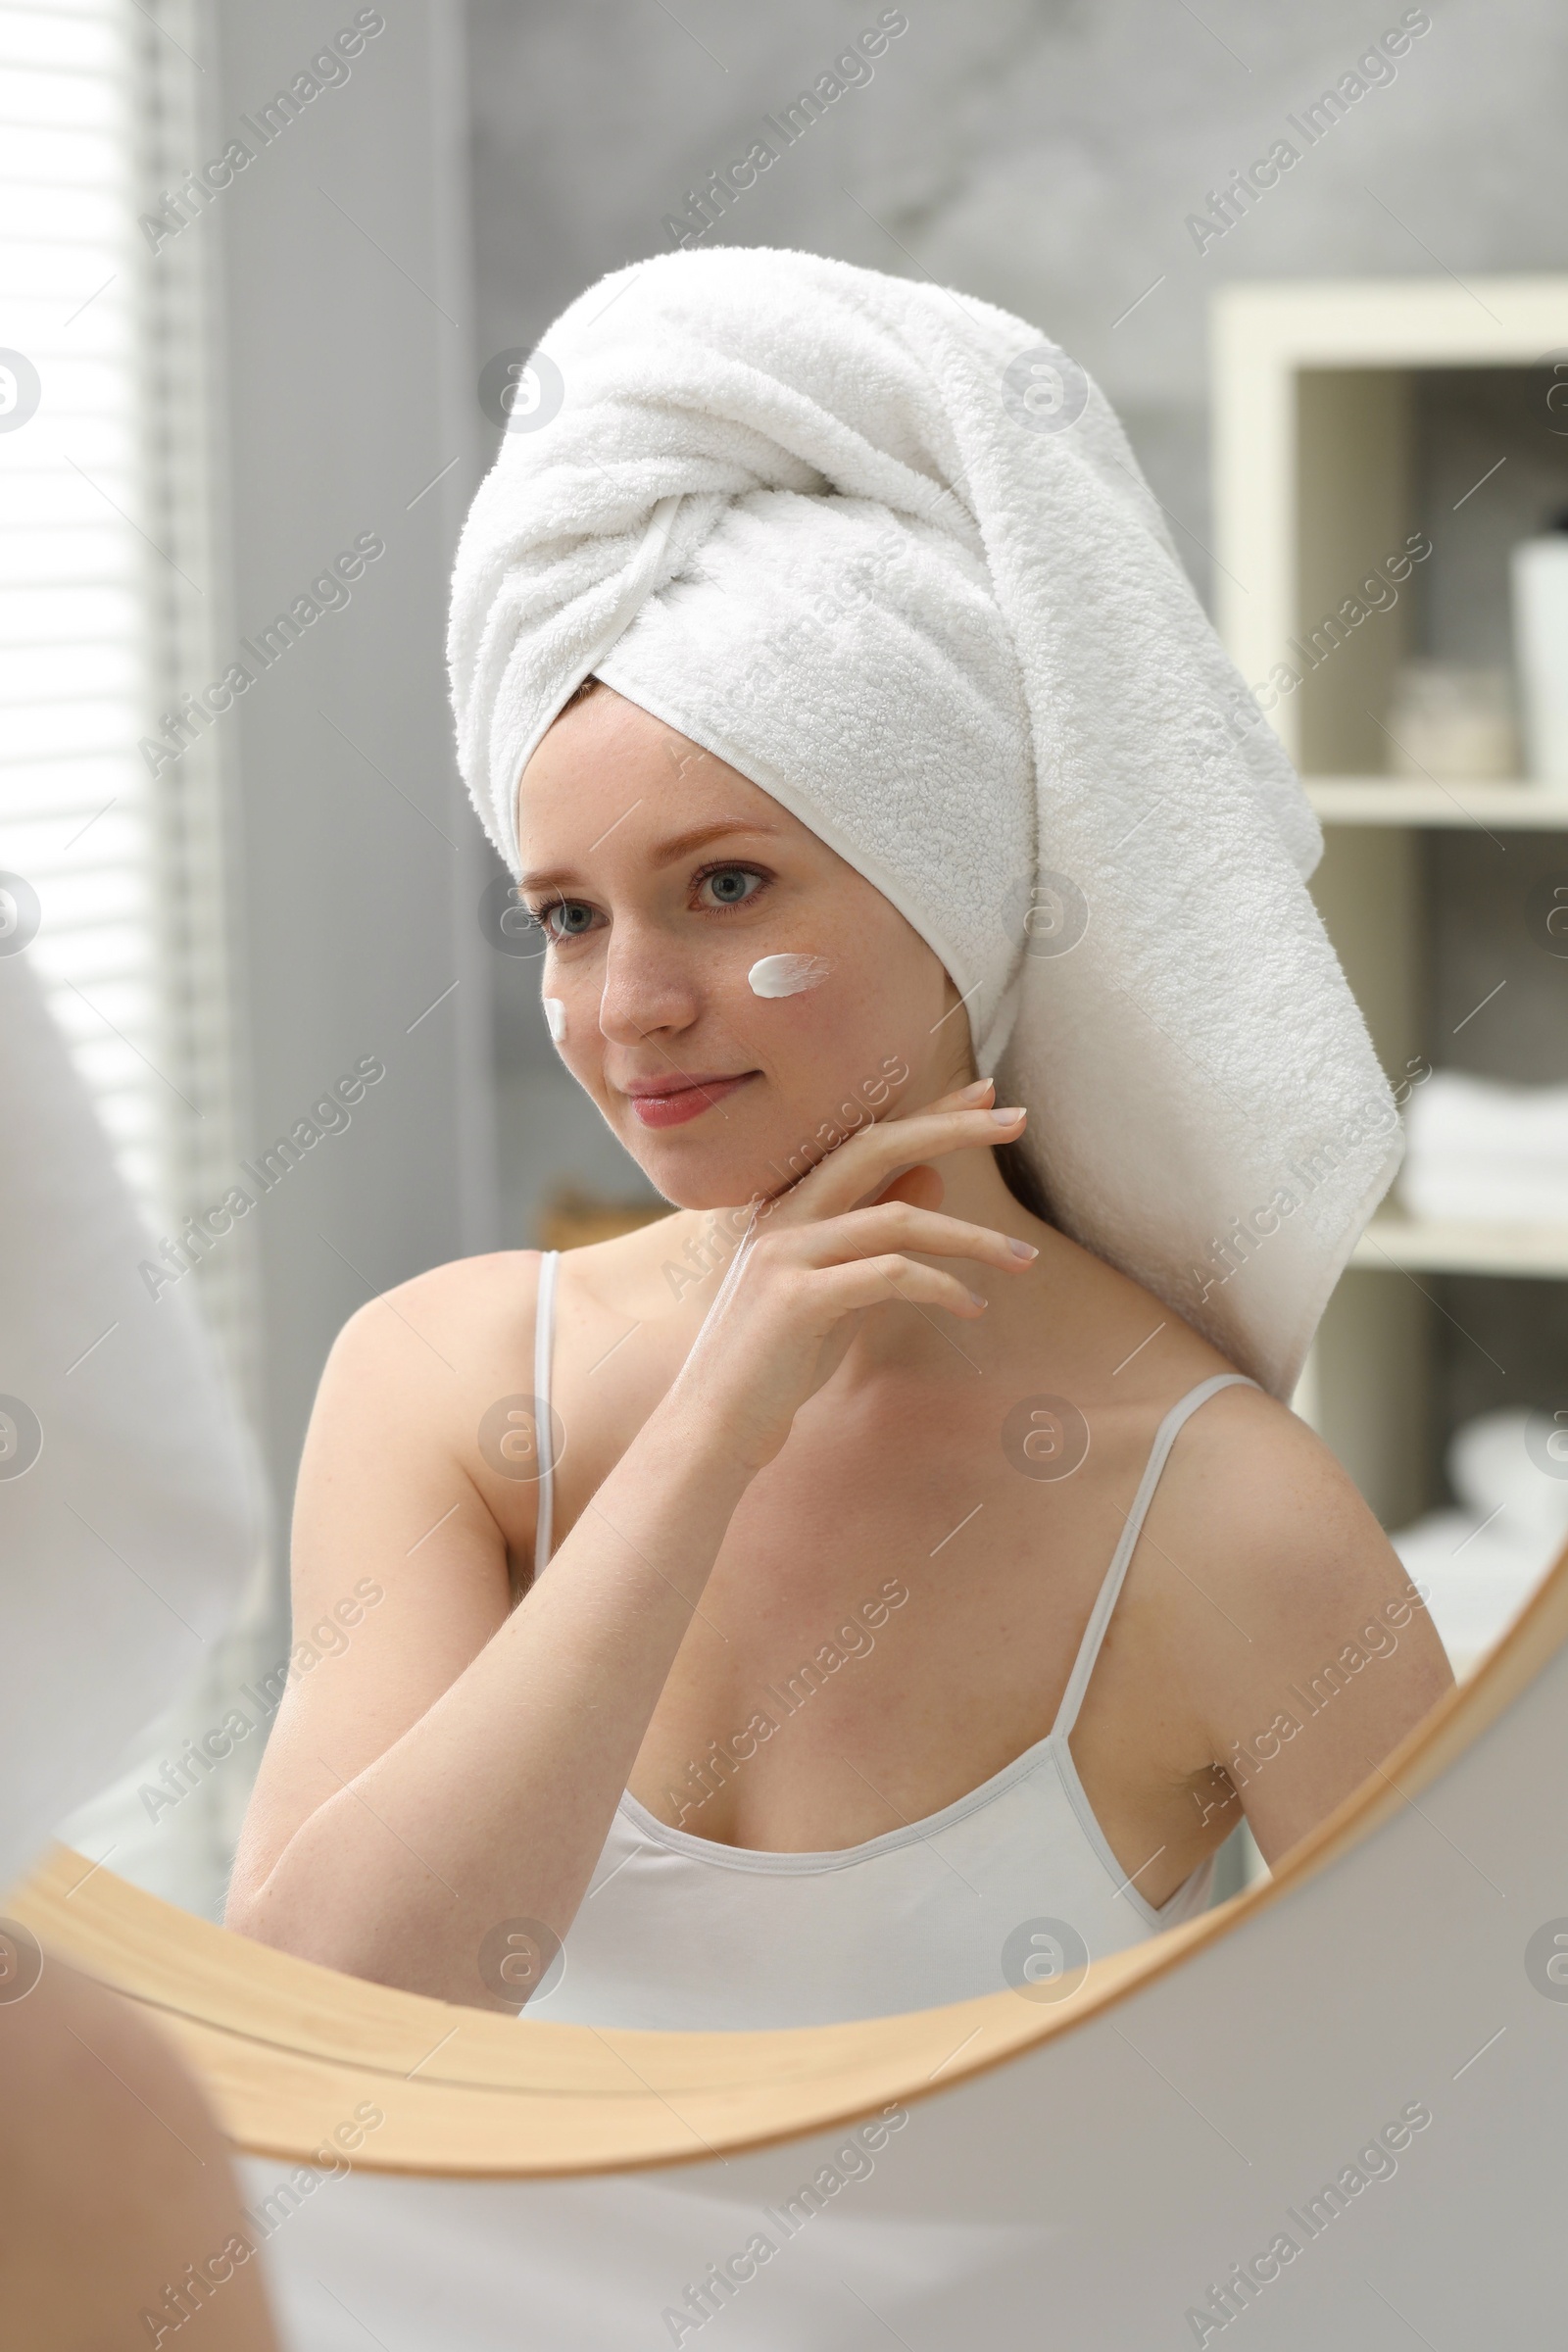 Photo of Beautiful woman with freckles and cream on her face near mirror in bathroom